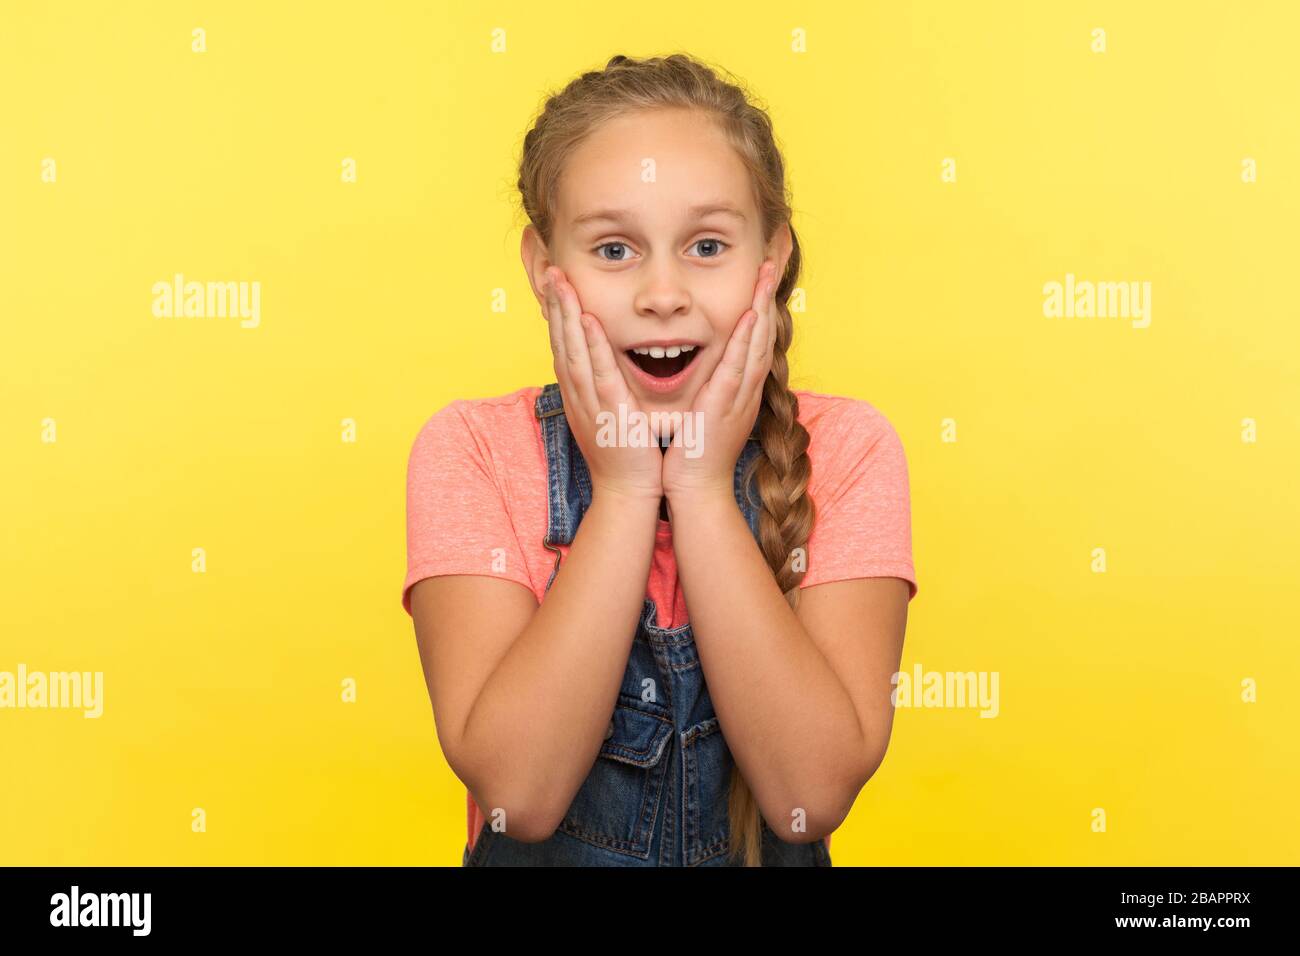 Awesome unexpected event. Portrait of astonished little girl touching face in surprise, expressing amazement, child shocked by sudden crazy news. indo Stock Photo